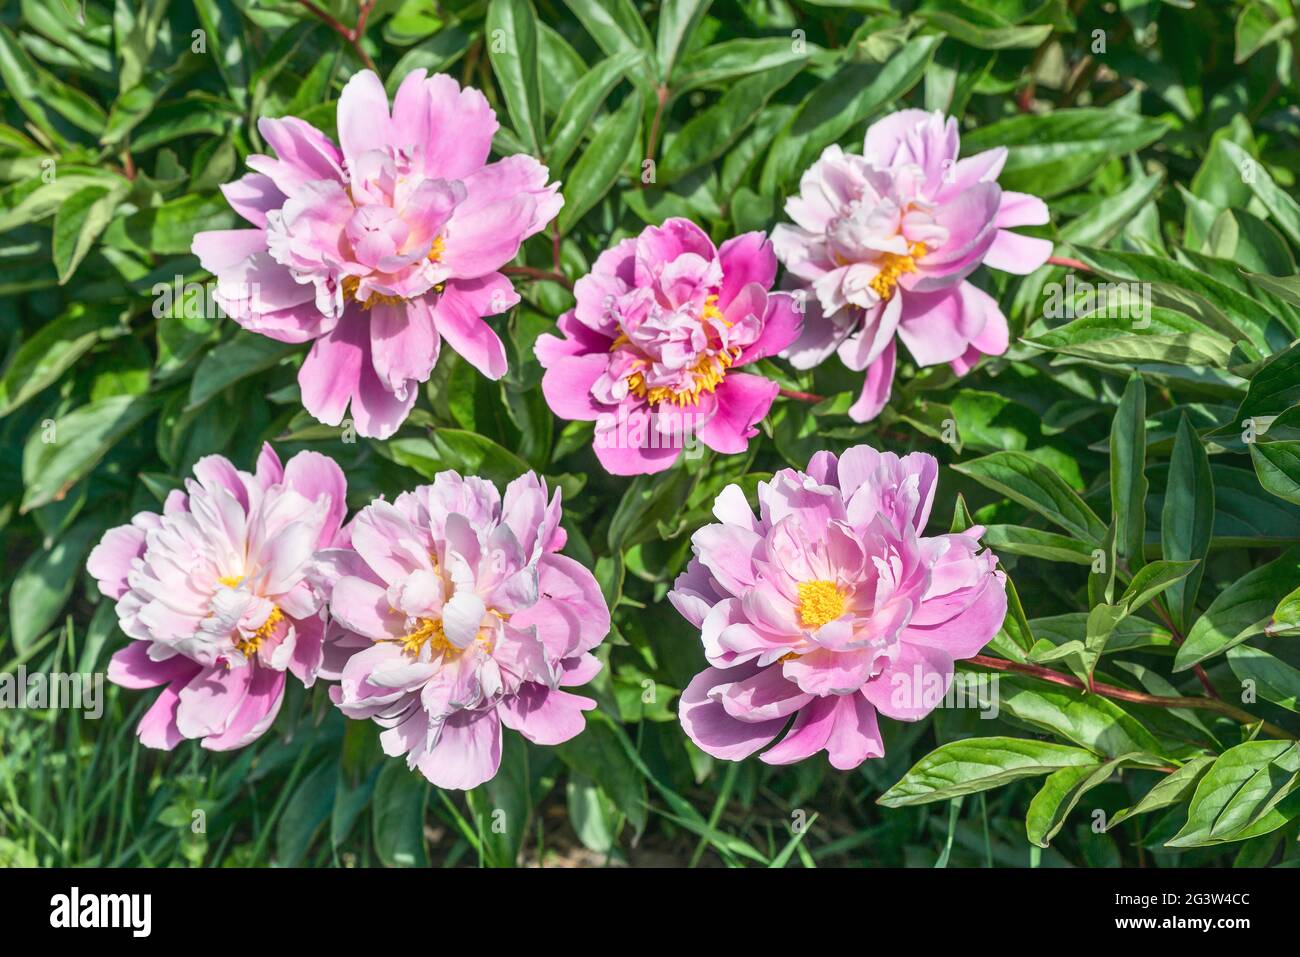 Herbaceous peonies Lake of Silver. Carmine pink double flowers with silvery tips. Stock Photo